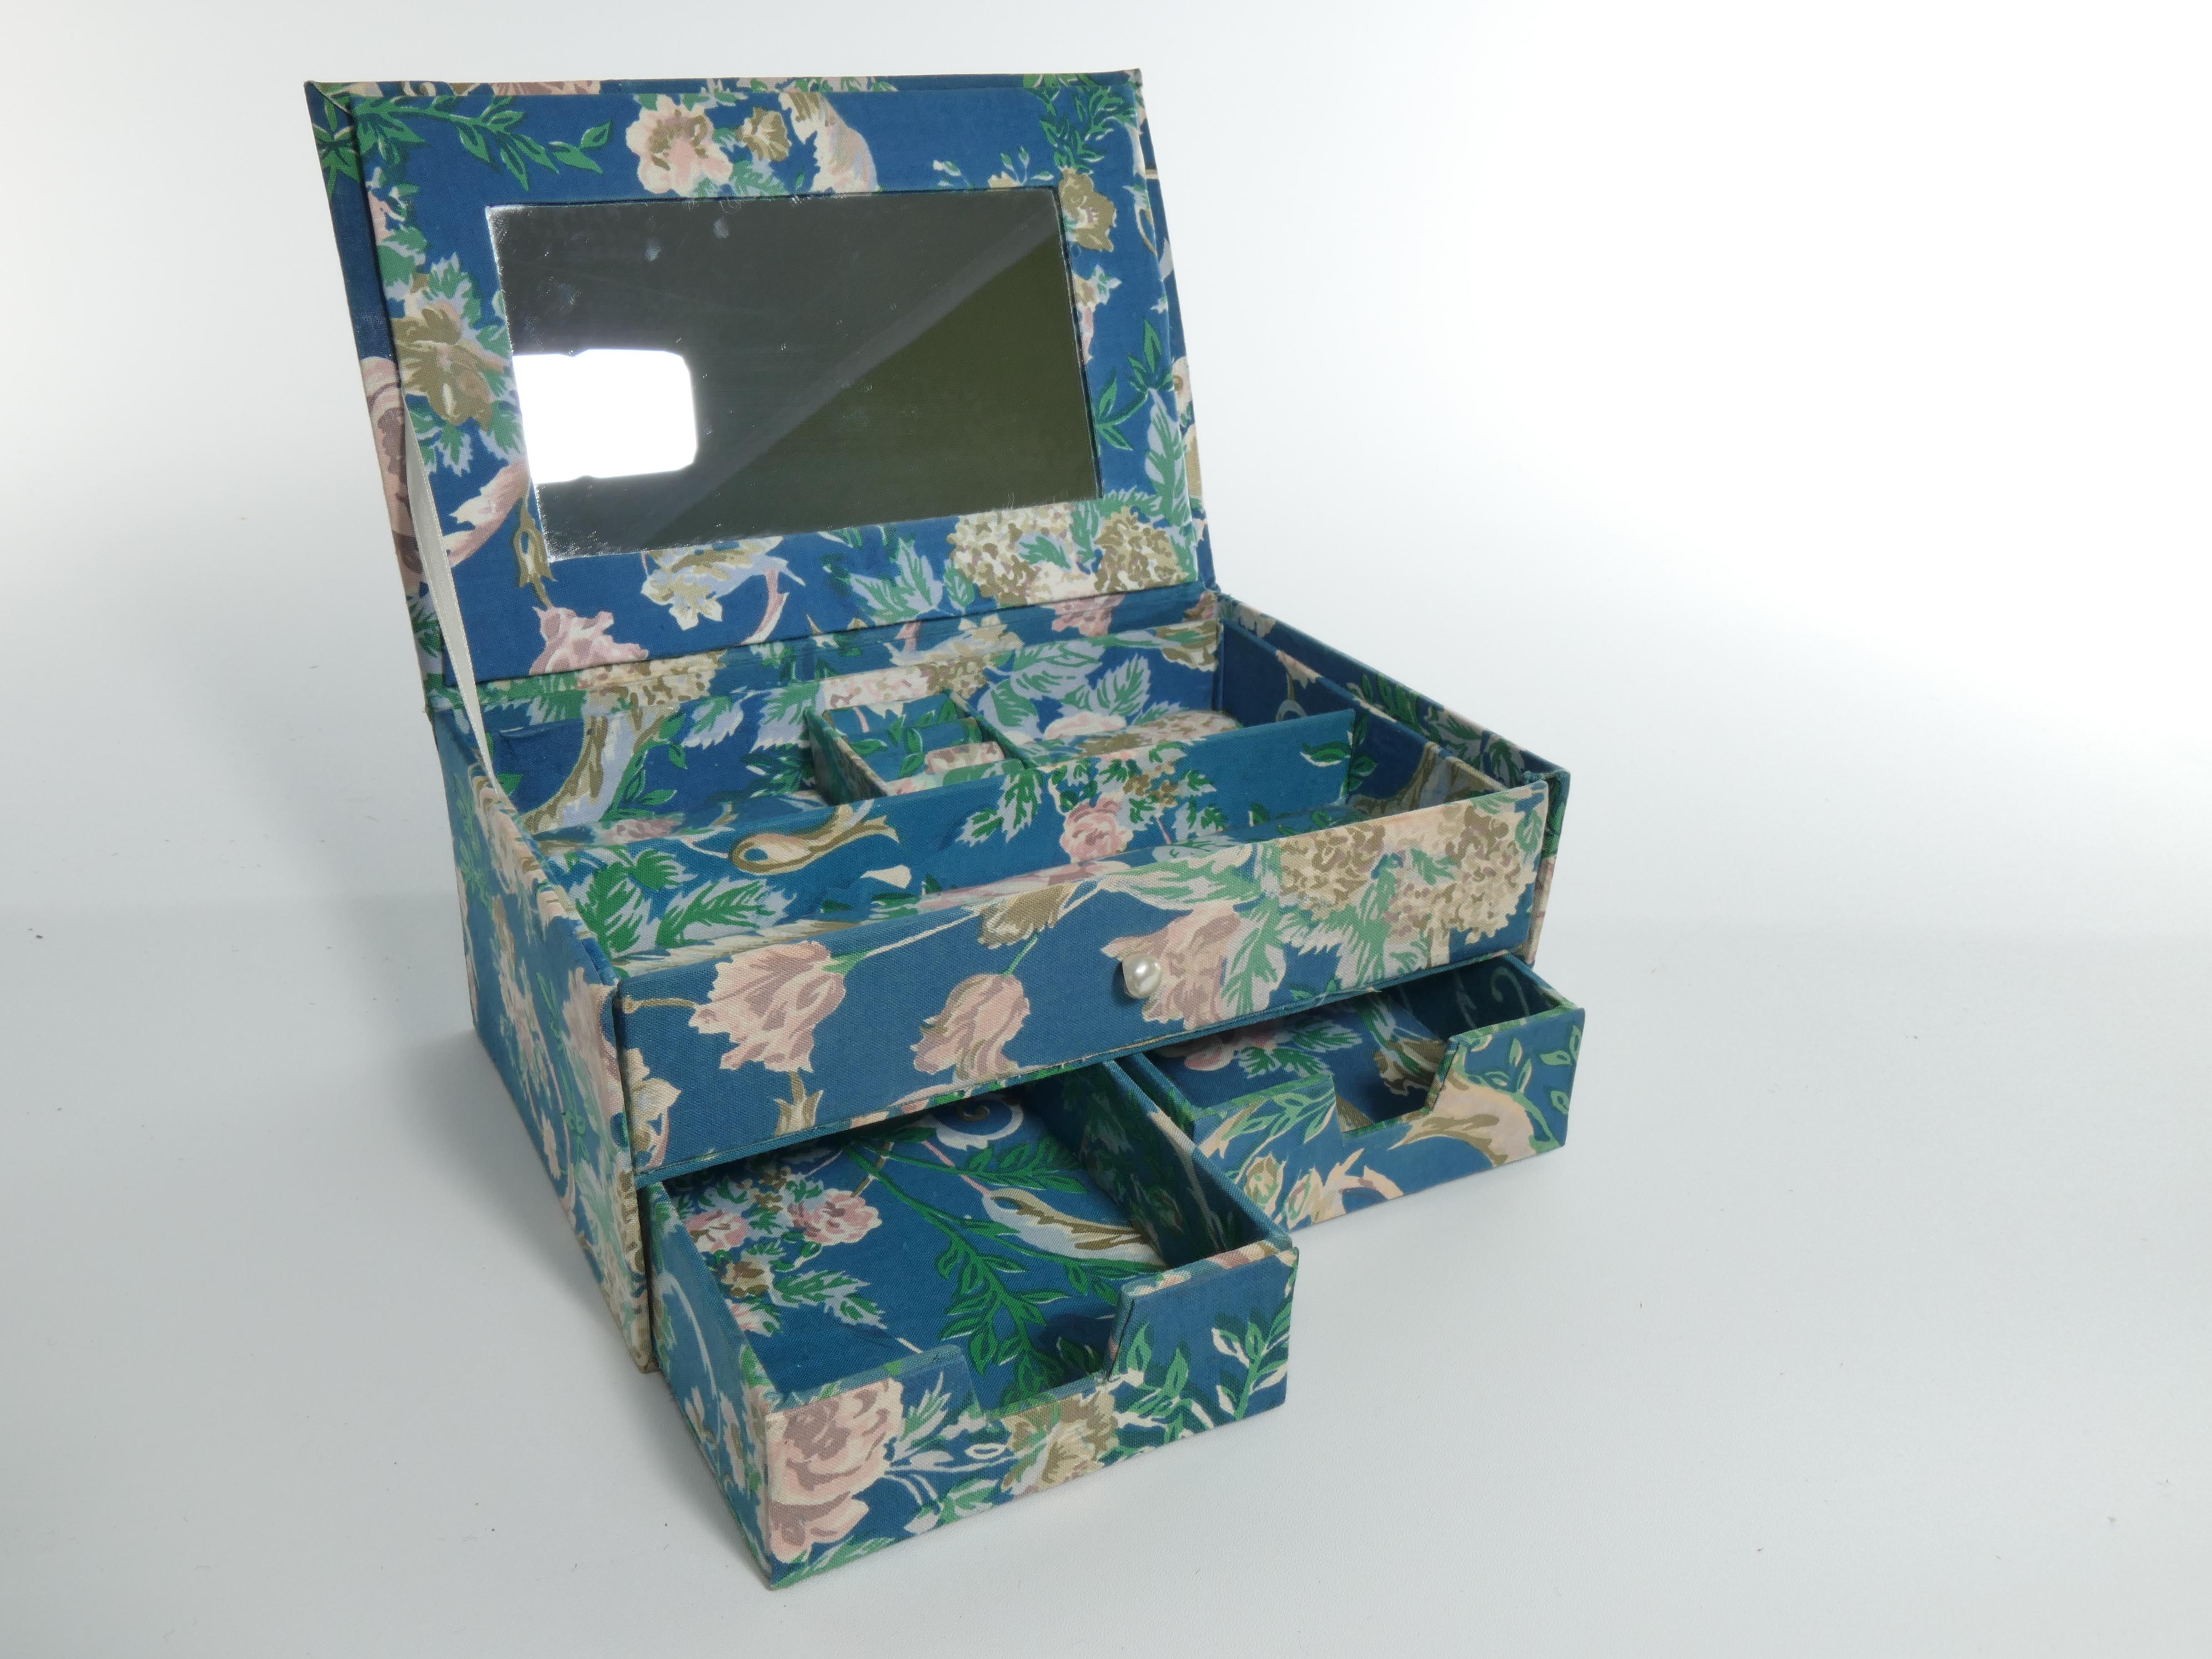 Vintage Jewelry Box in Blue Textile With Floral Motifs For Sale 2